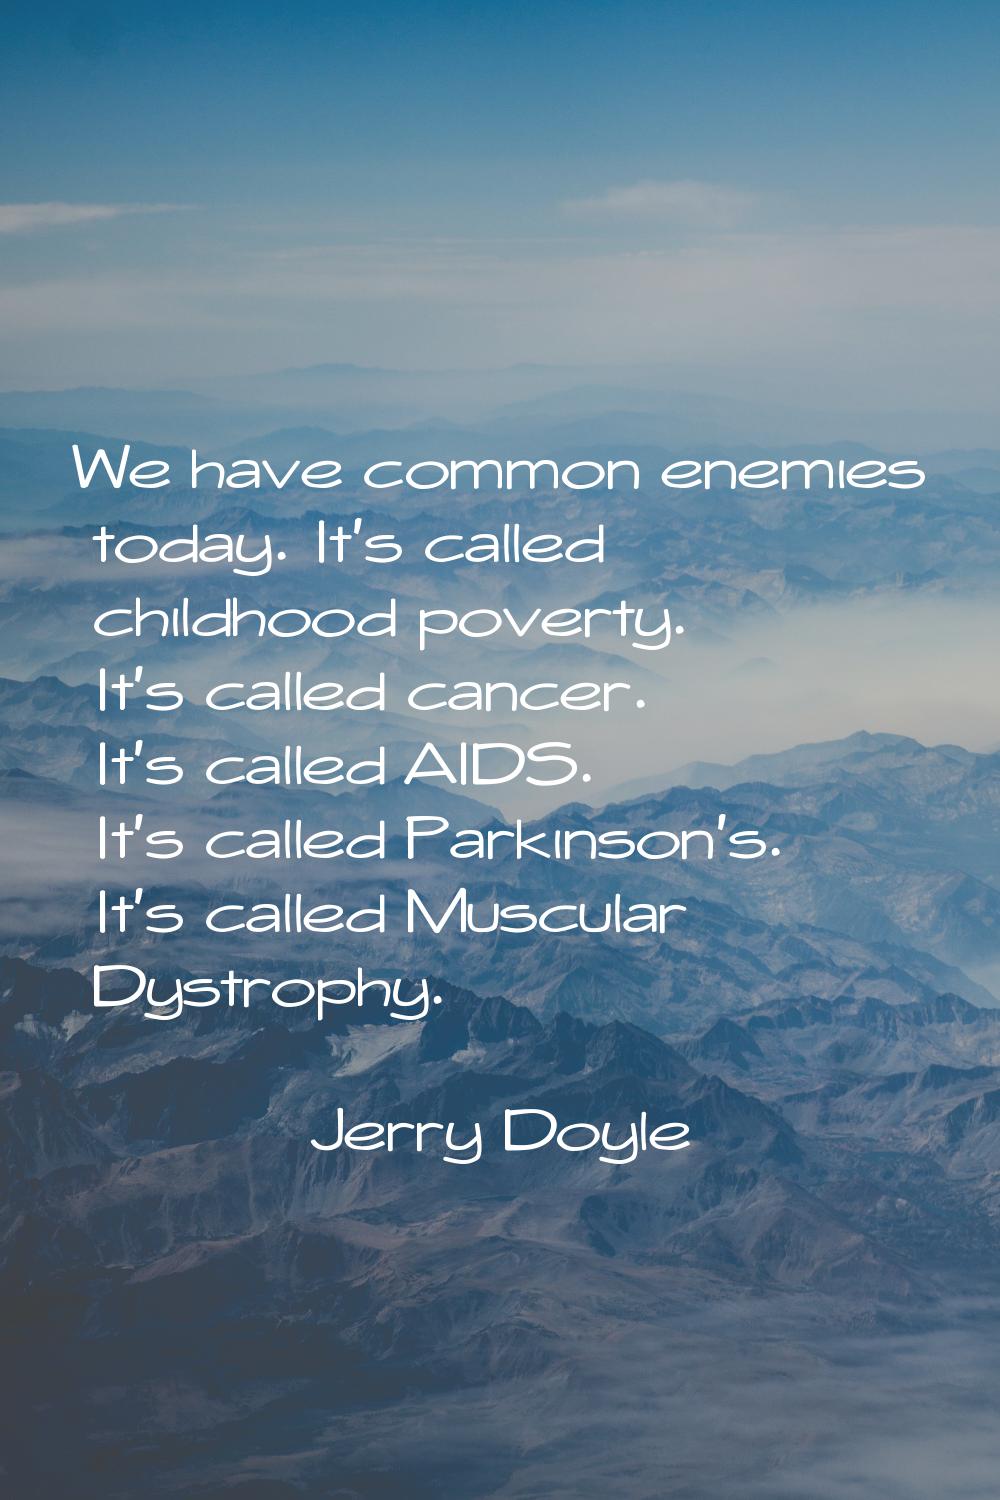 We have common enemies today. It's called childhood poverty. It's called cancer. It's called AIDS. 